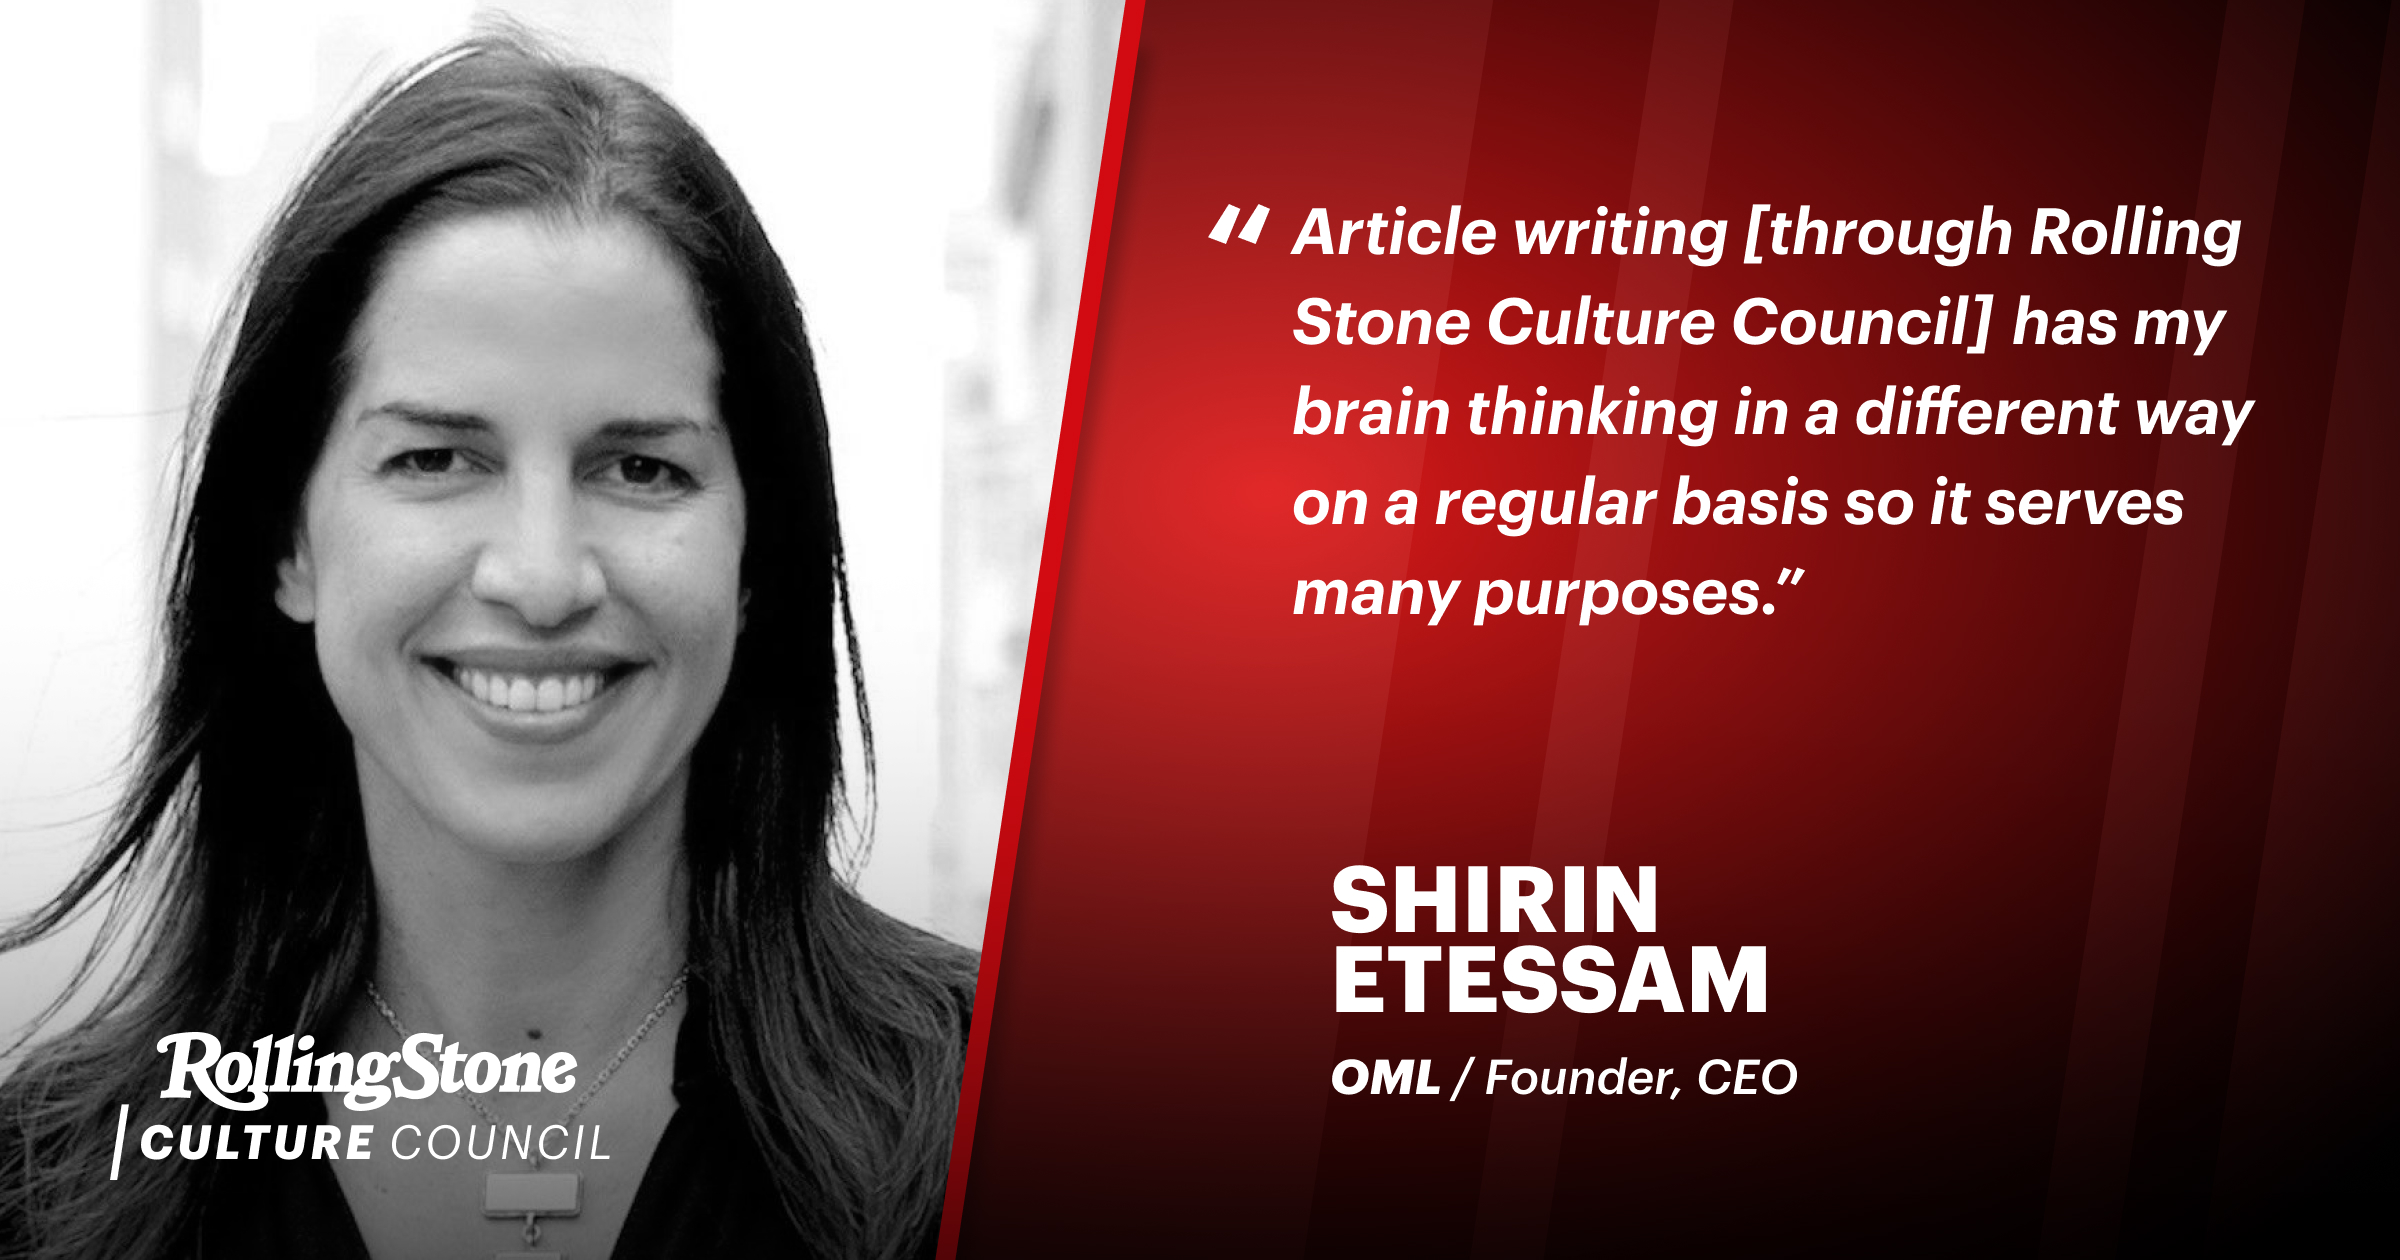 Through Rolling Stone Culture Council, Shirin Etessam Positions Herself as a Writer and Thought Leader